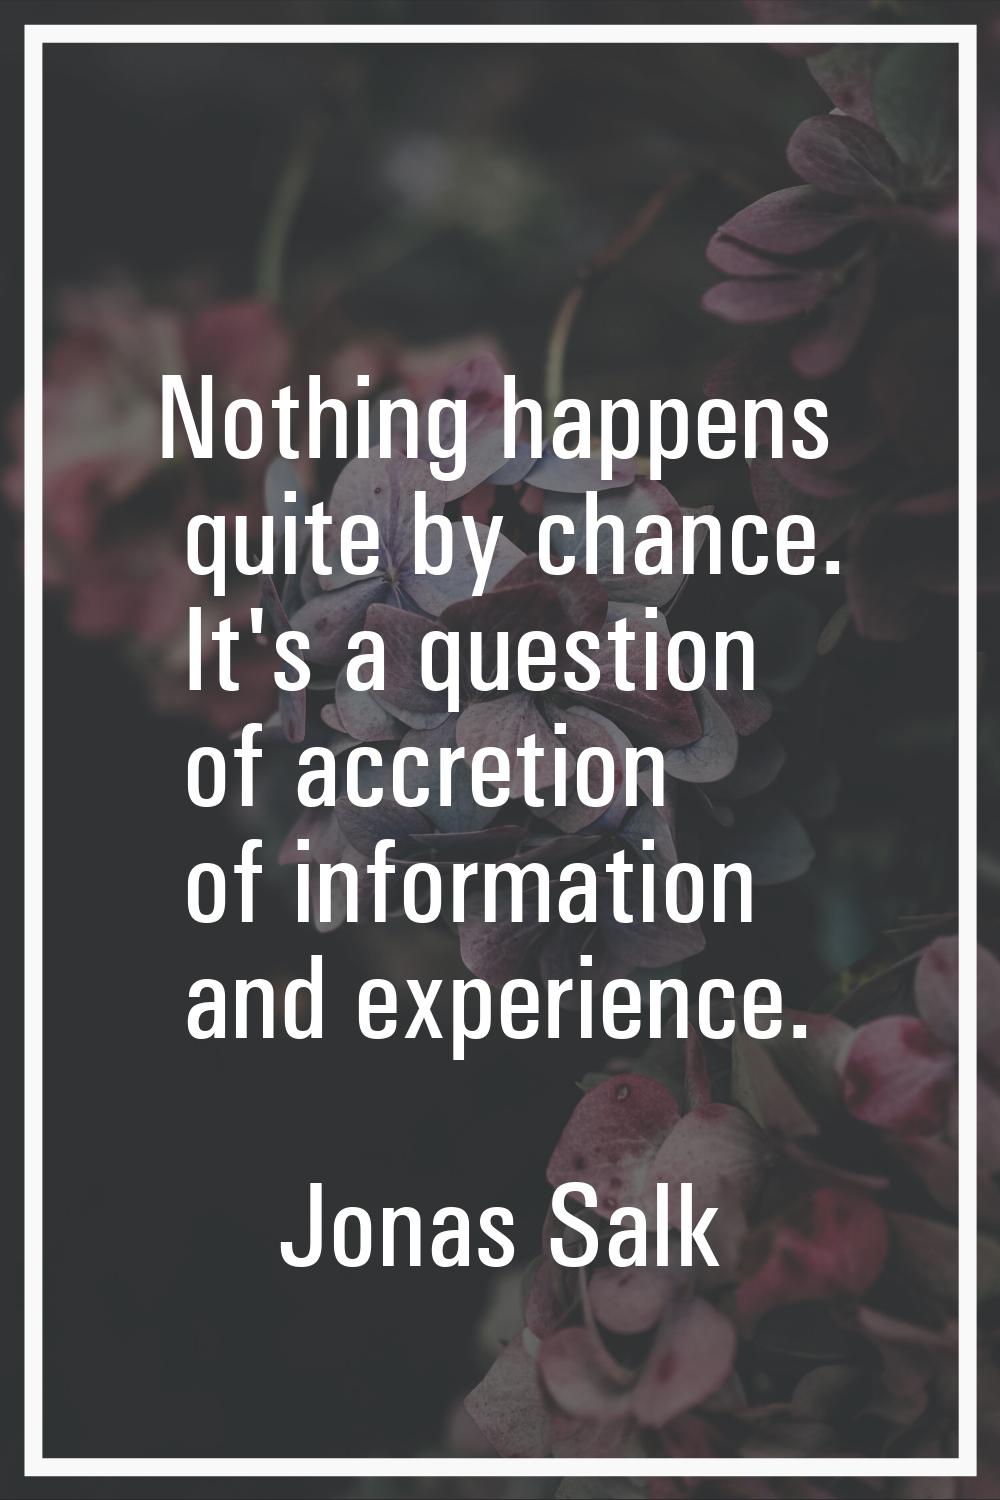 Nothing happens quite by chance. It's a question of accretion of information and experience.